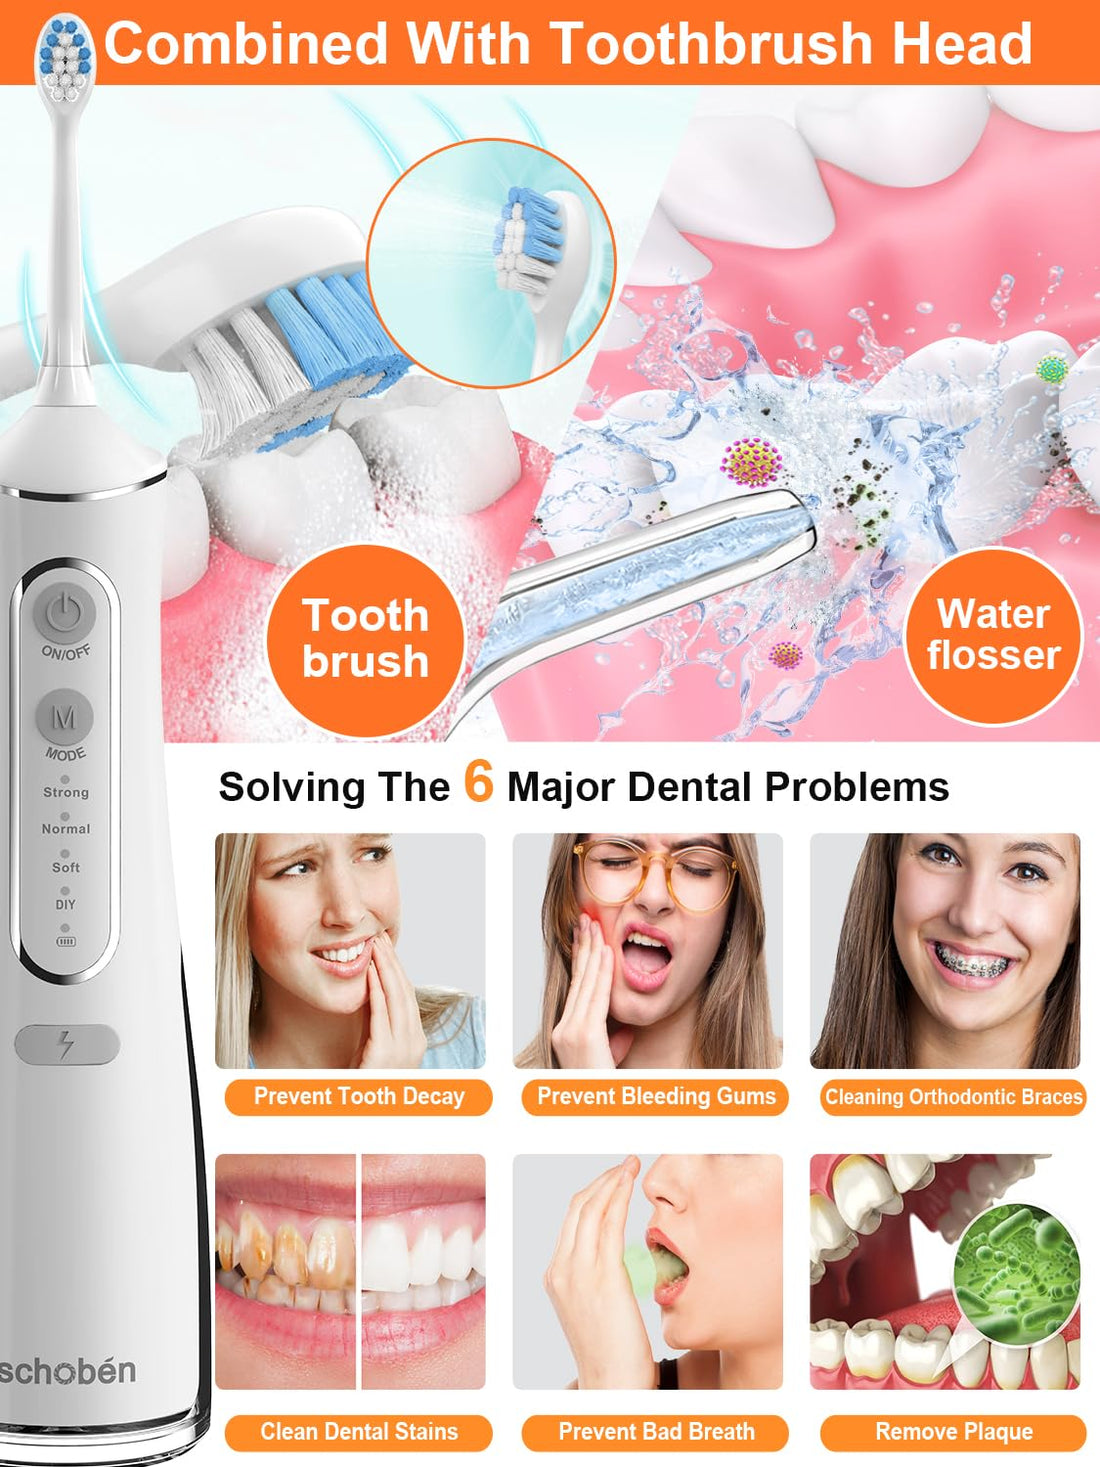 Water Dental Flosser Tools for Teeth Rechargeable Portable Water Pick Dental Oral Irrigator Cleaning Cordless with Toothbrush Tongue Scraper Travel Bag IPX7 Waterproof (White)